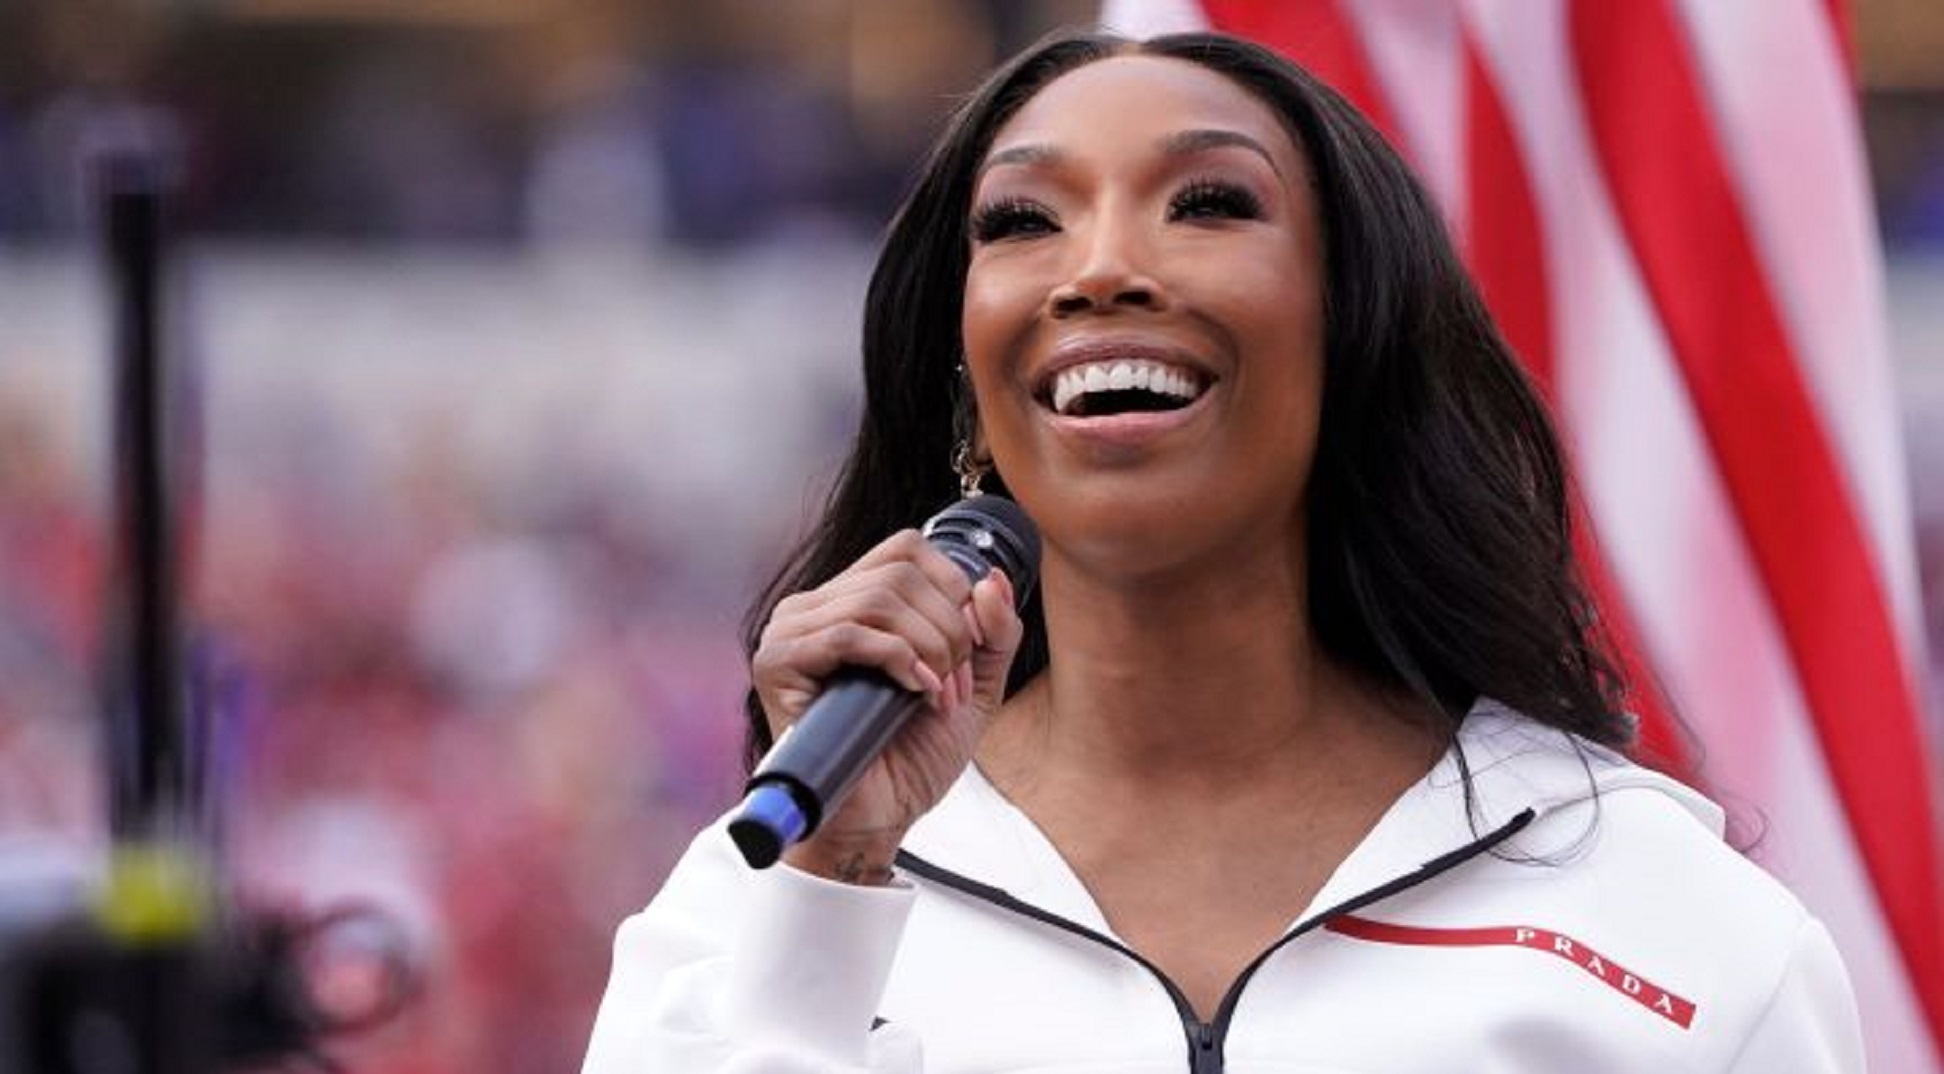 Watch: Brandy Performs US National Anthem At NFC Championship Game 2022